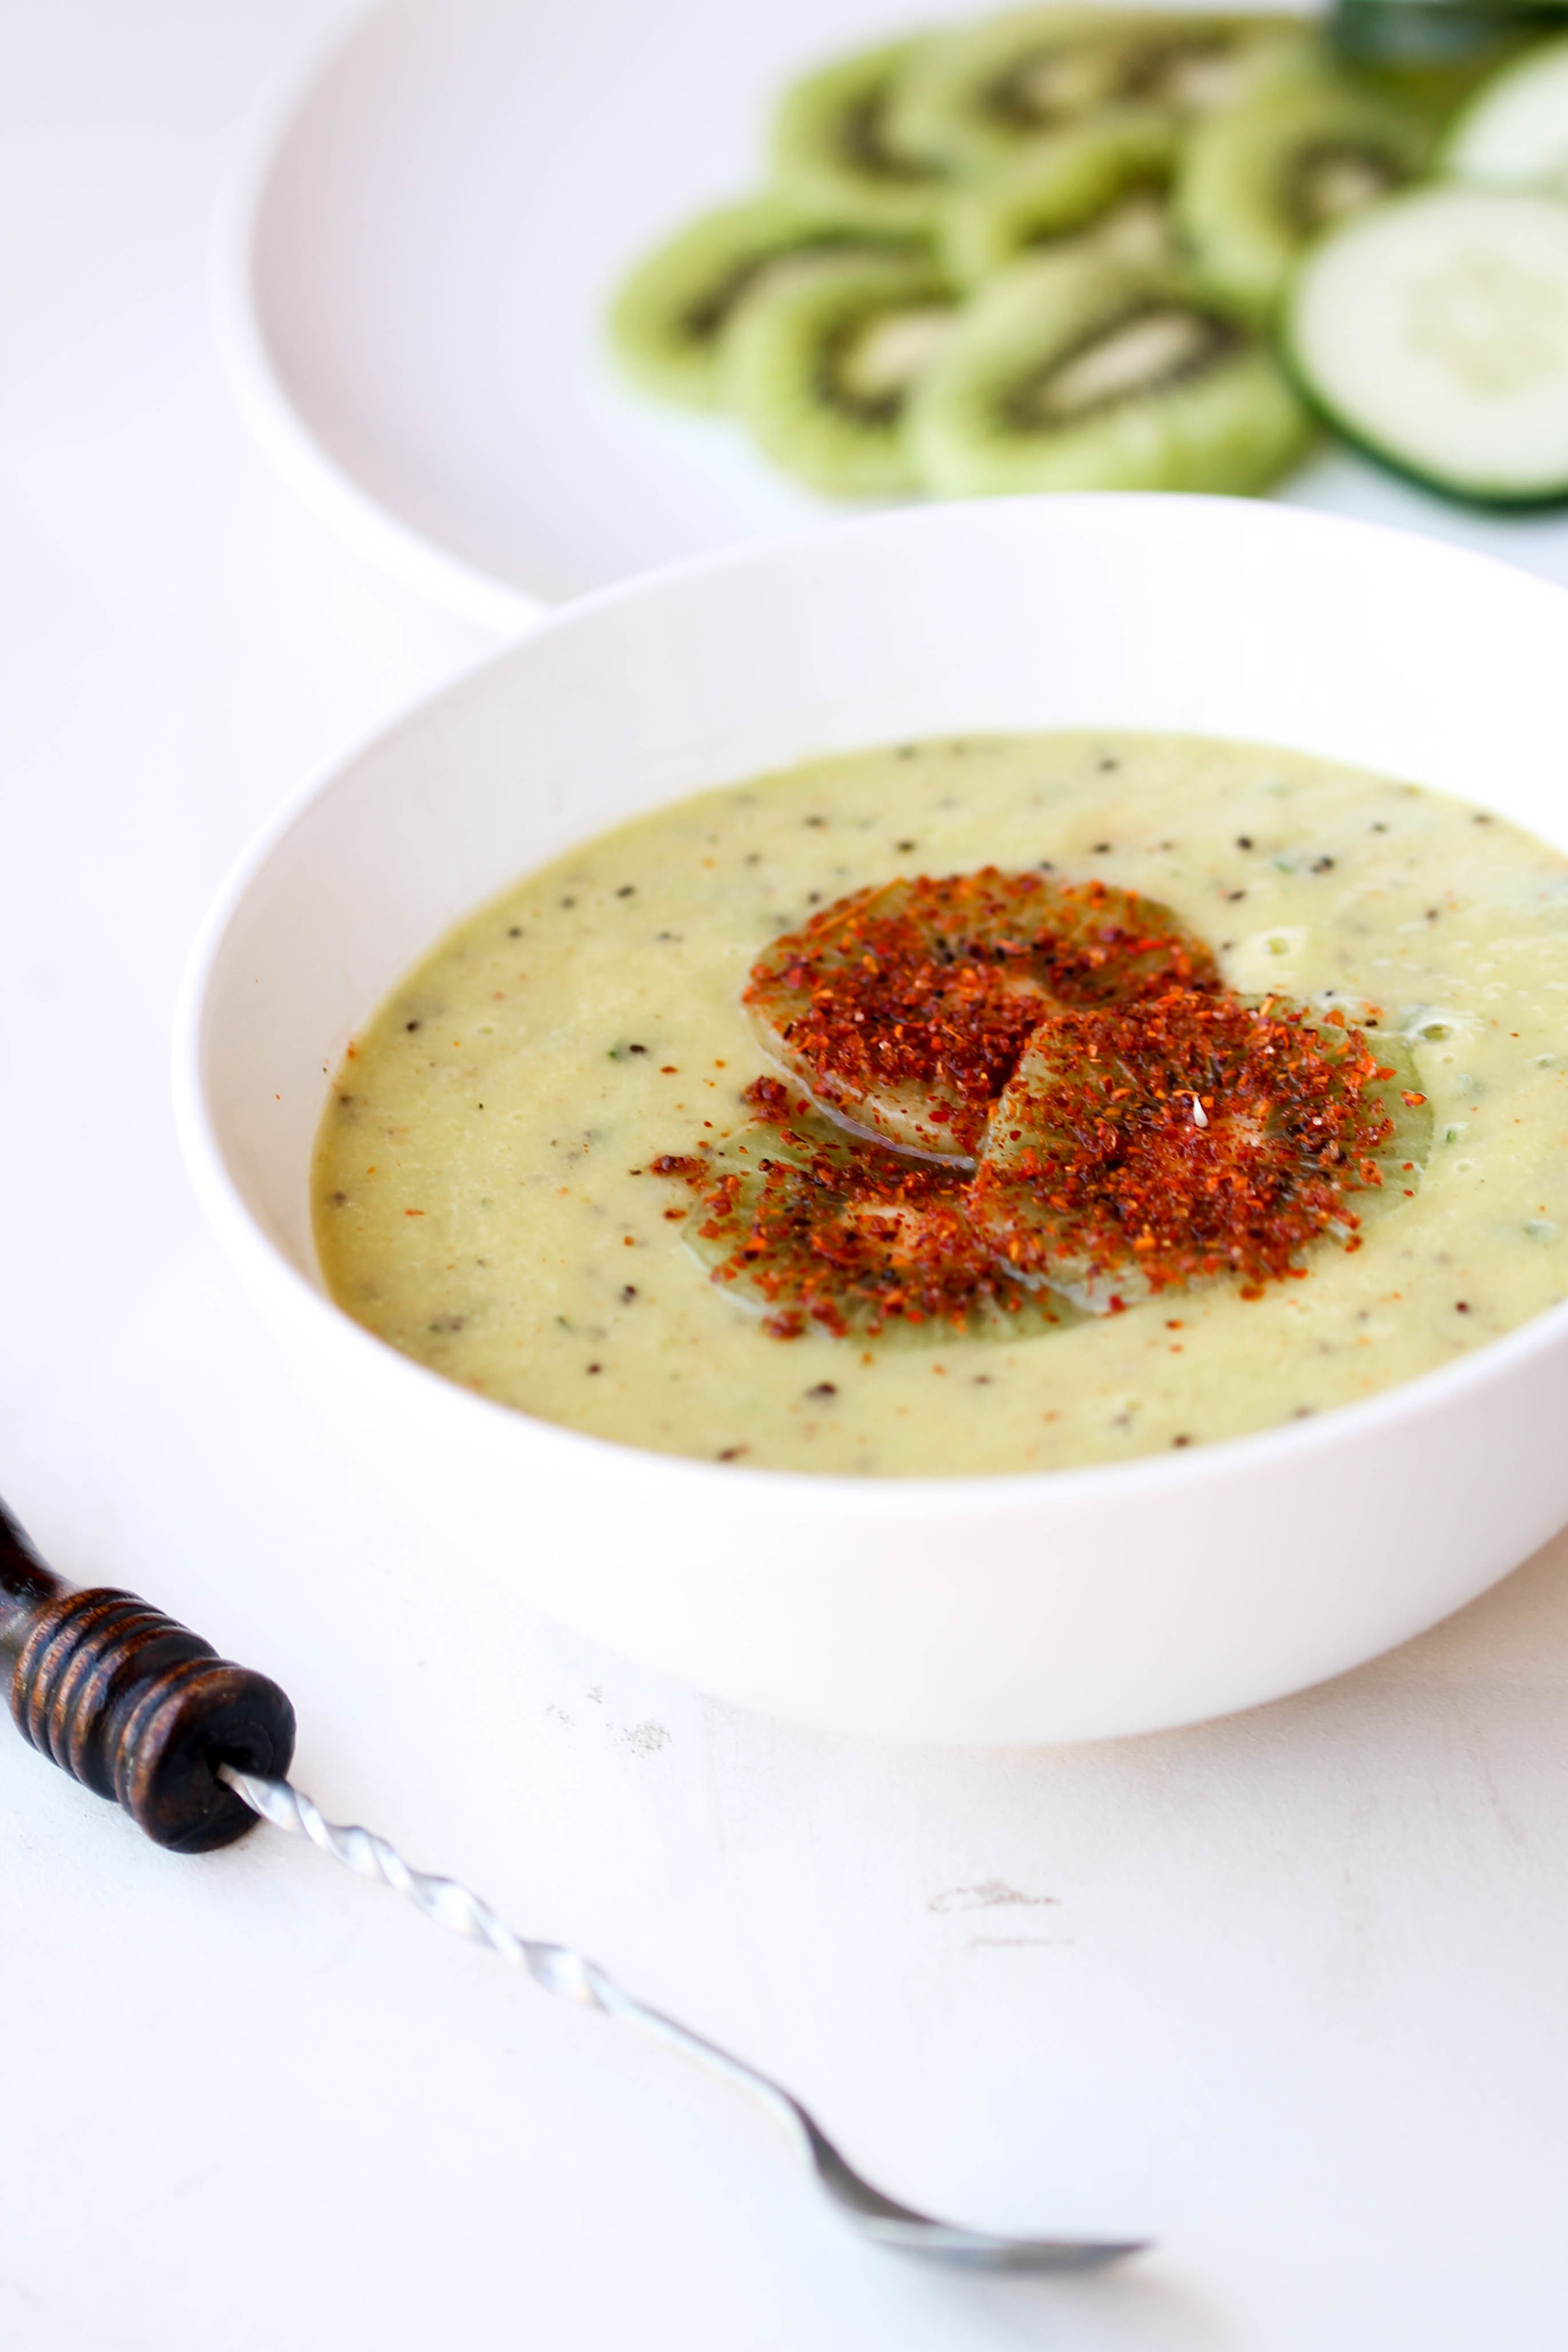 Chilled Kiwi Cucumber Soup : easy, refreshing naturally vegan, gluten-free soup that is ready in 30 minutes or less!